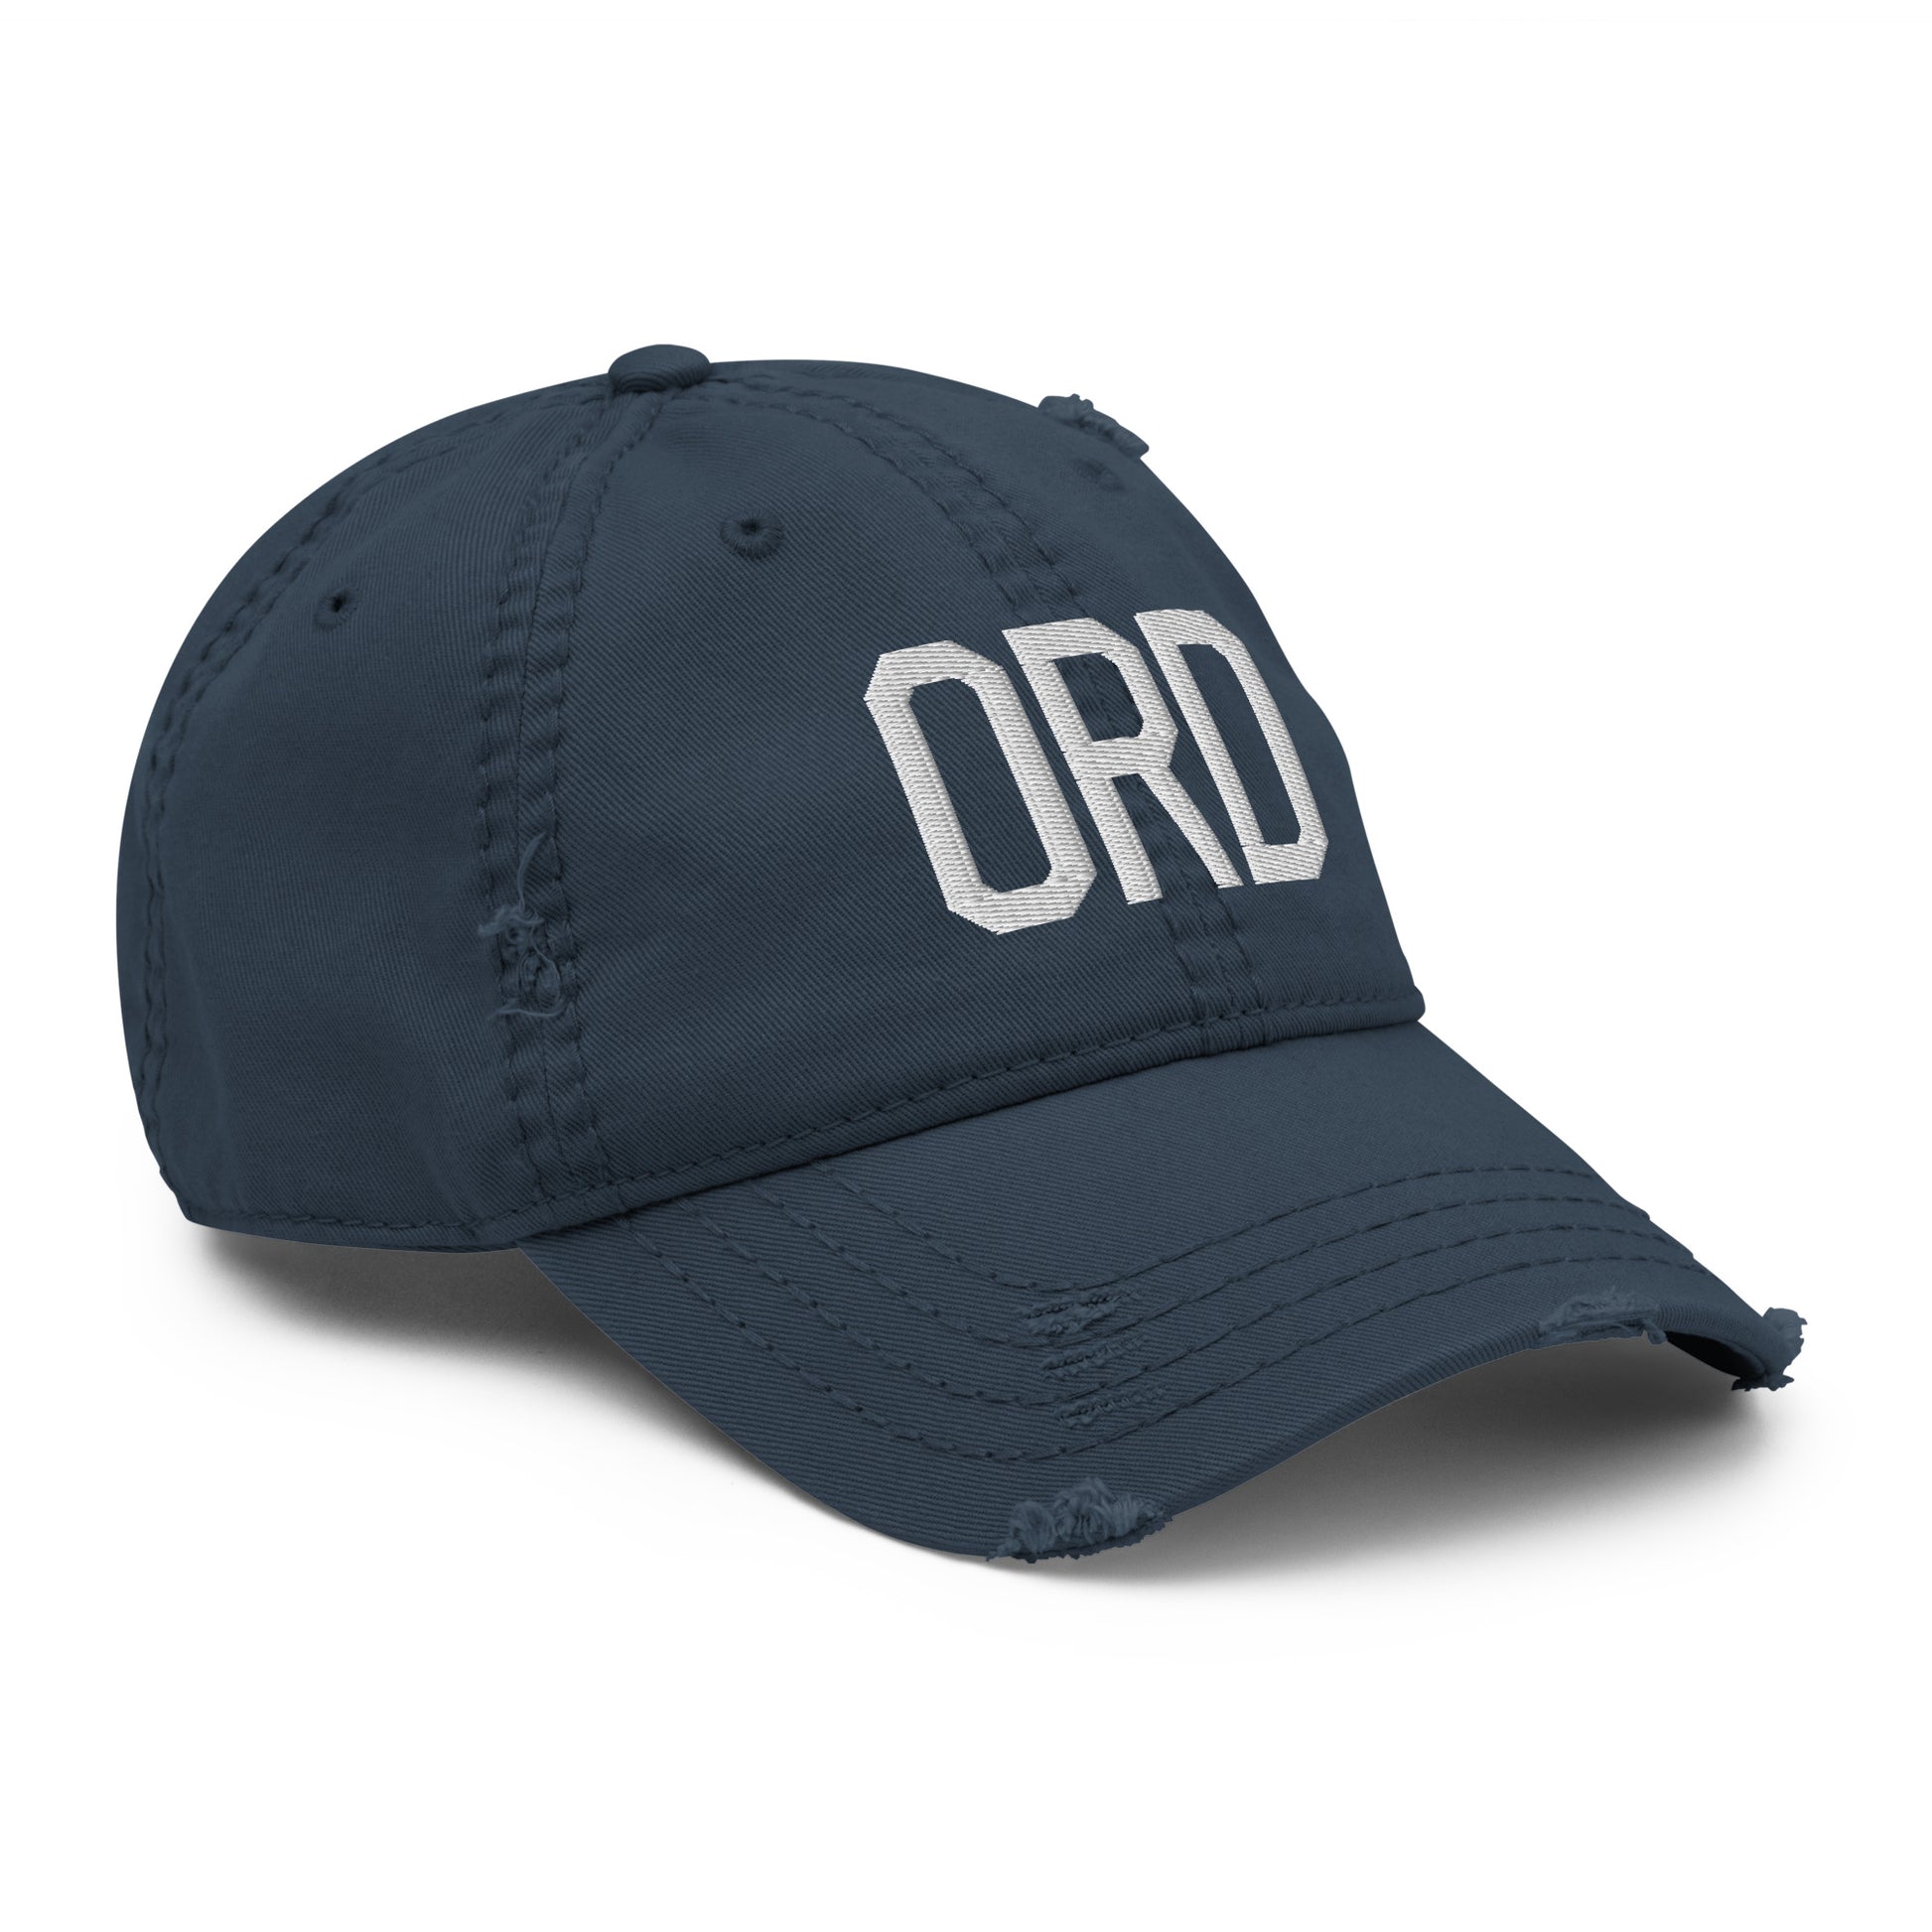 Airport Code Distressed Hat - White • ORD Chicago • YHM Designs - Image 14